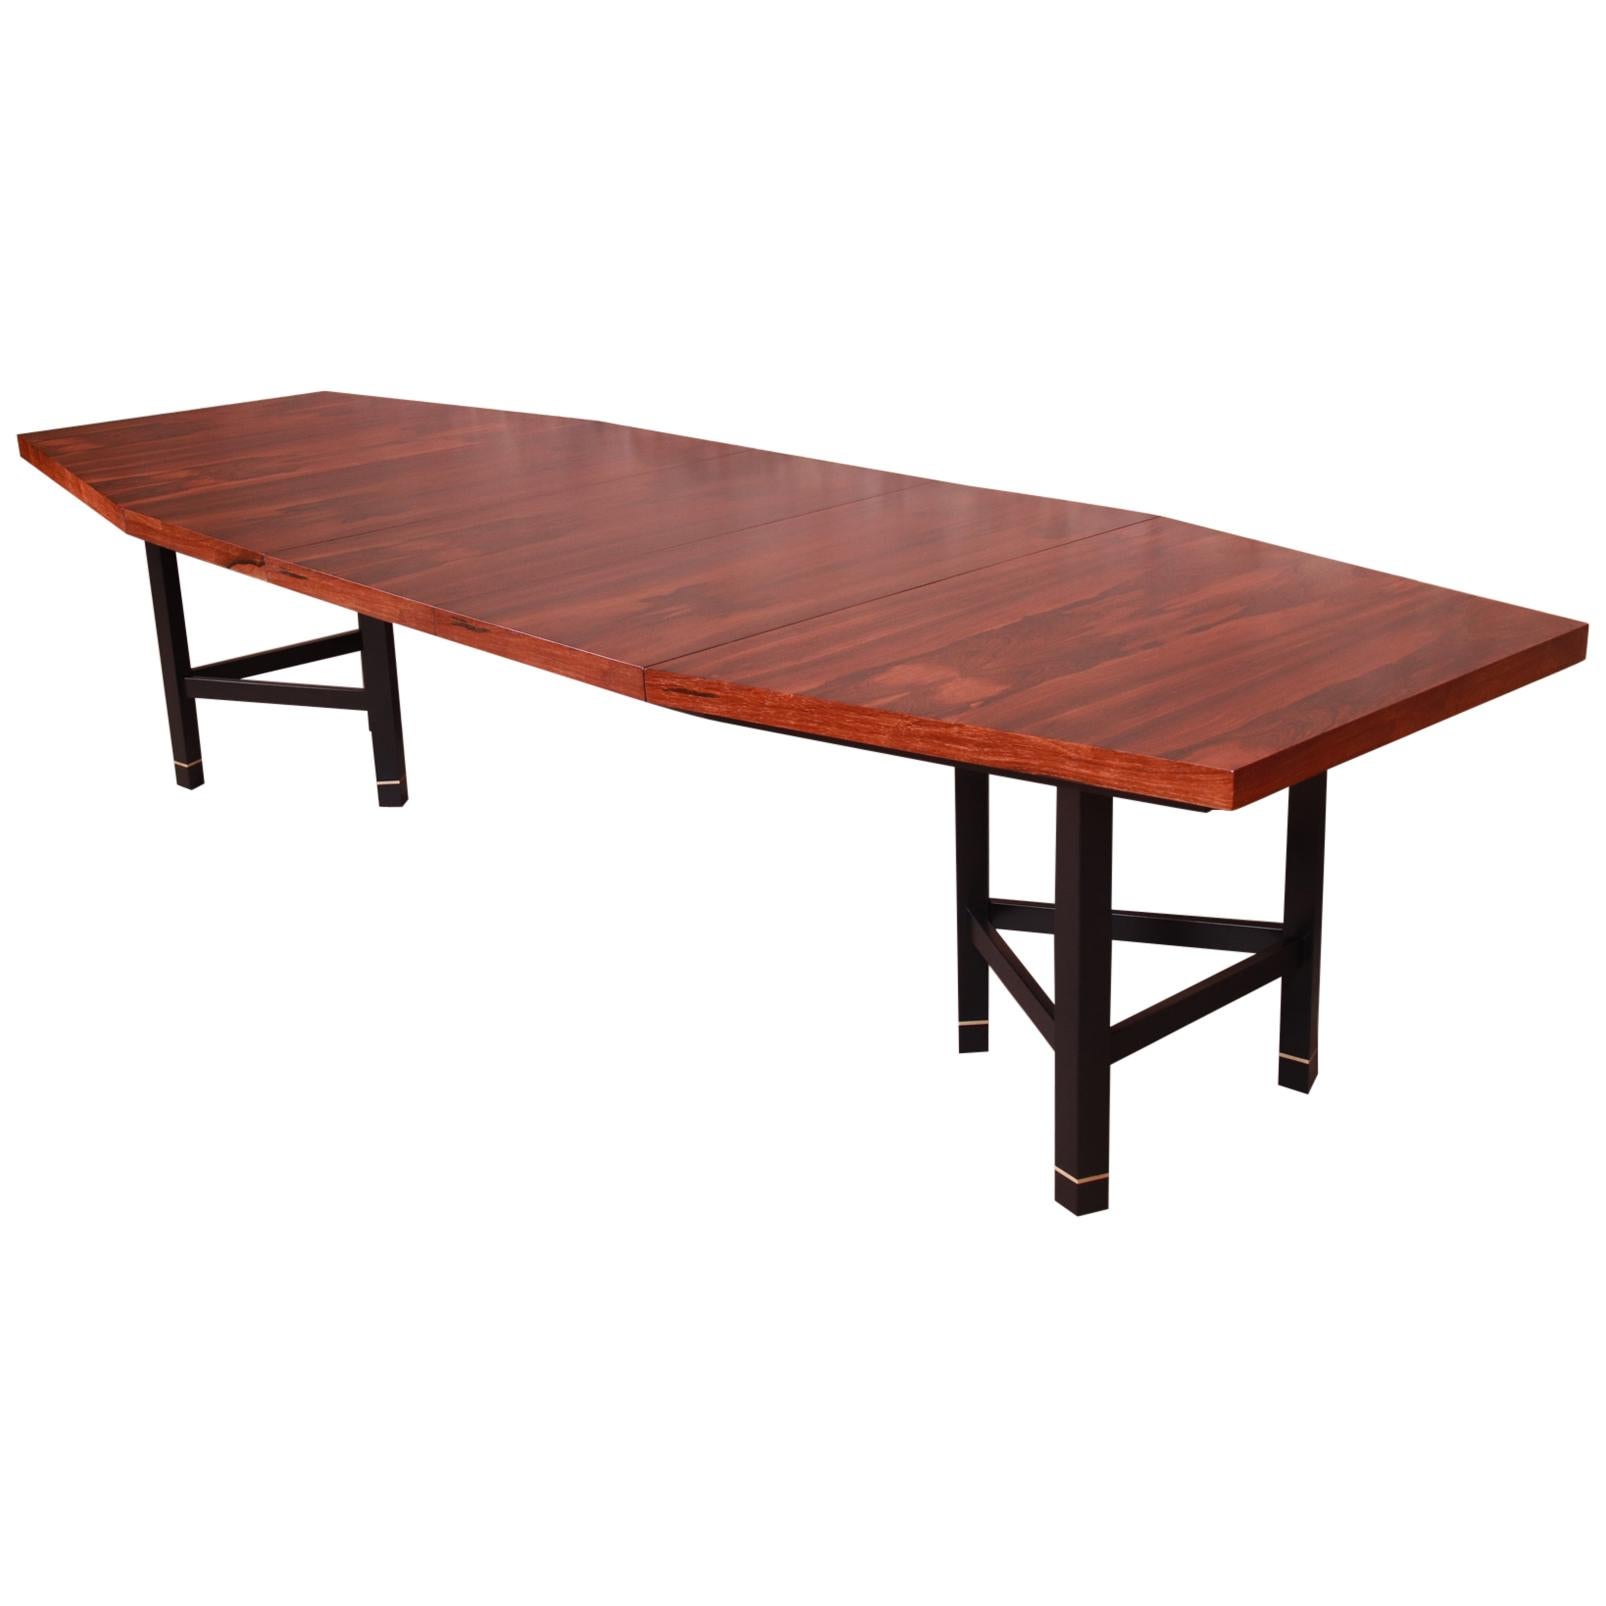 Harvey Probber Brazilian Rosewood Boat-Shaped Extension Dining Table, Restored